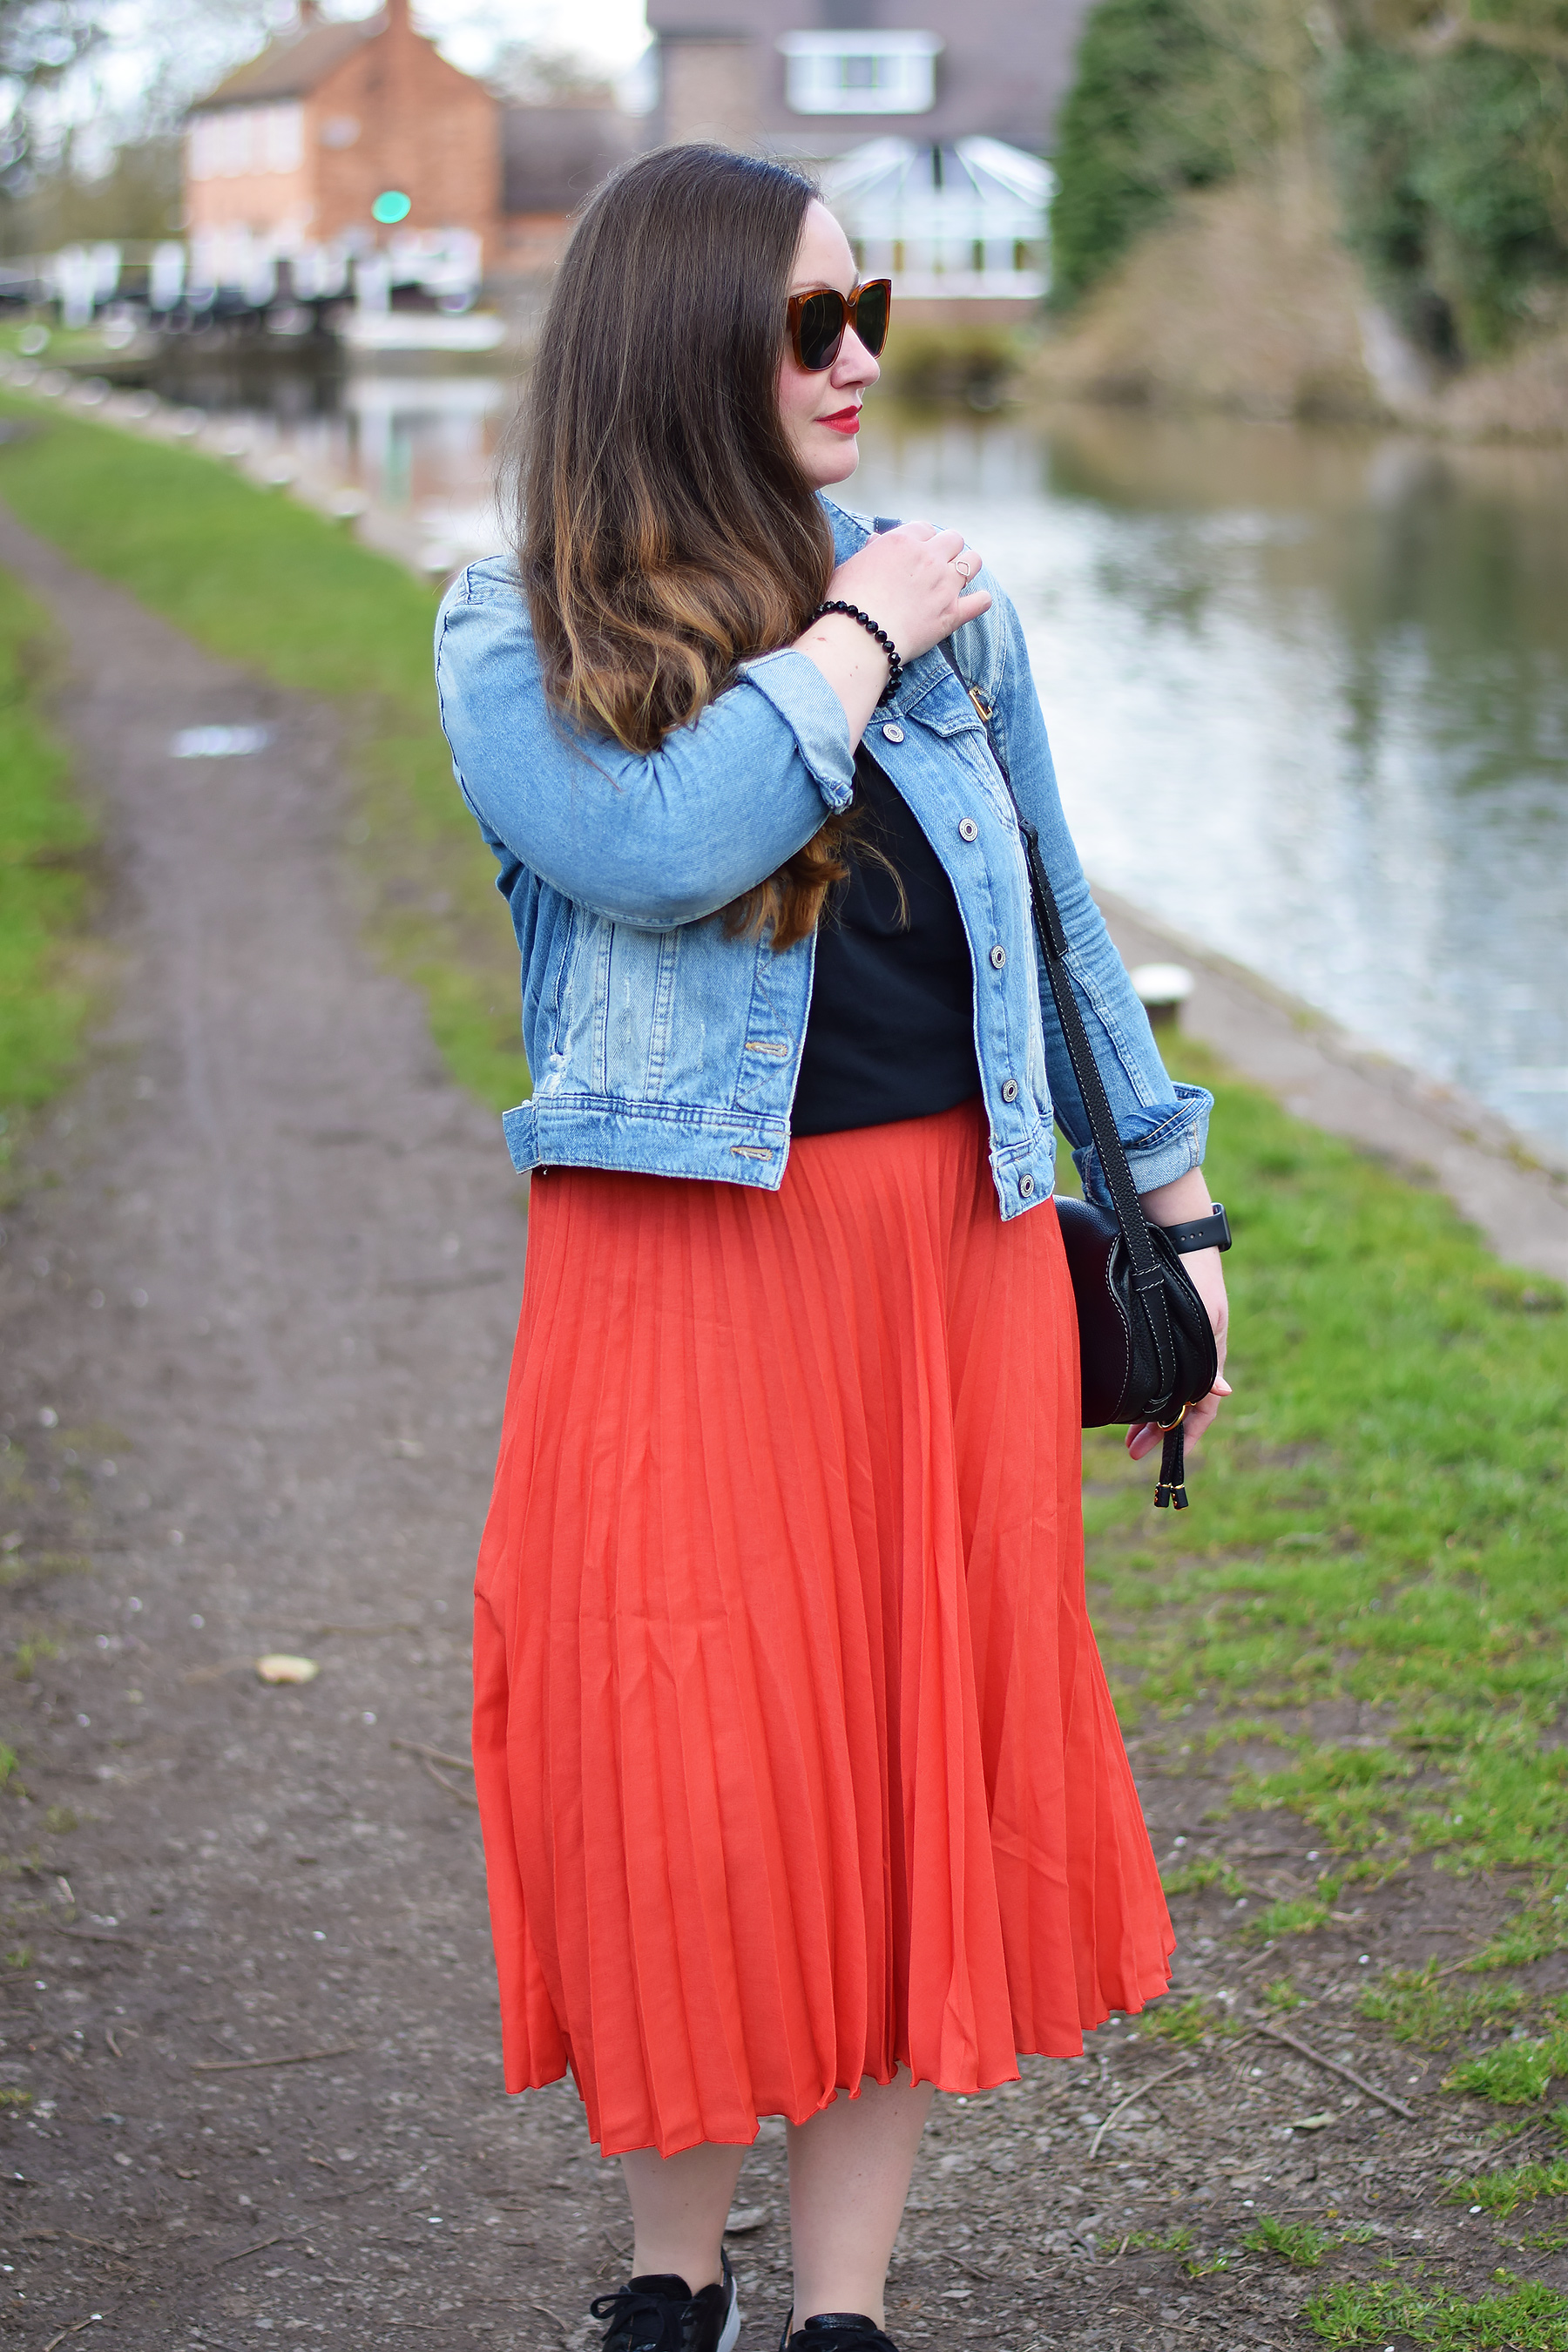 HOW TO STYLE AN ORANGE PLEATED MIDI SKIRT